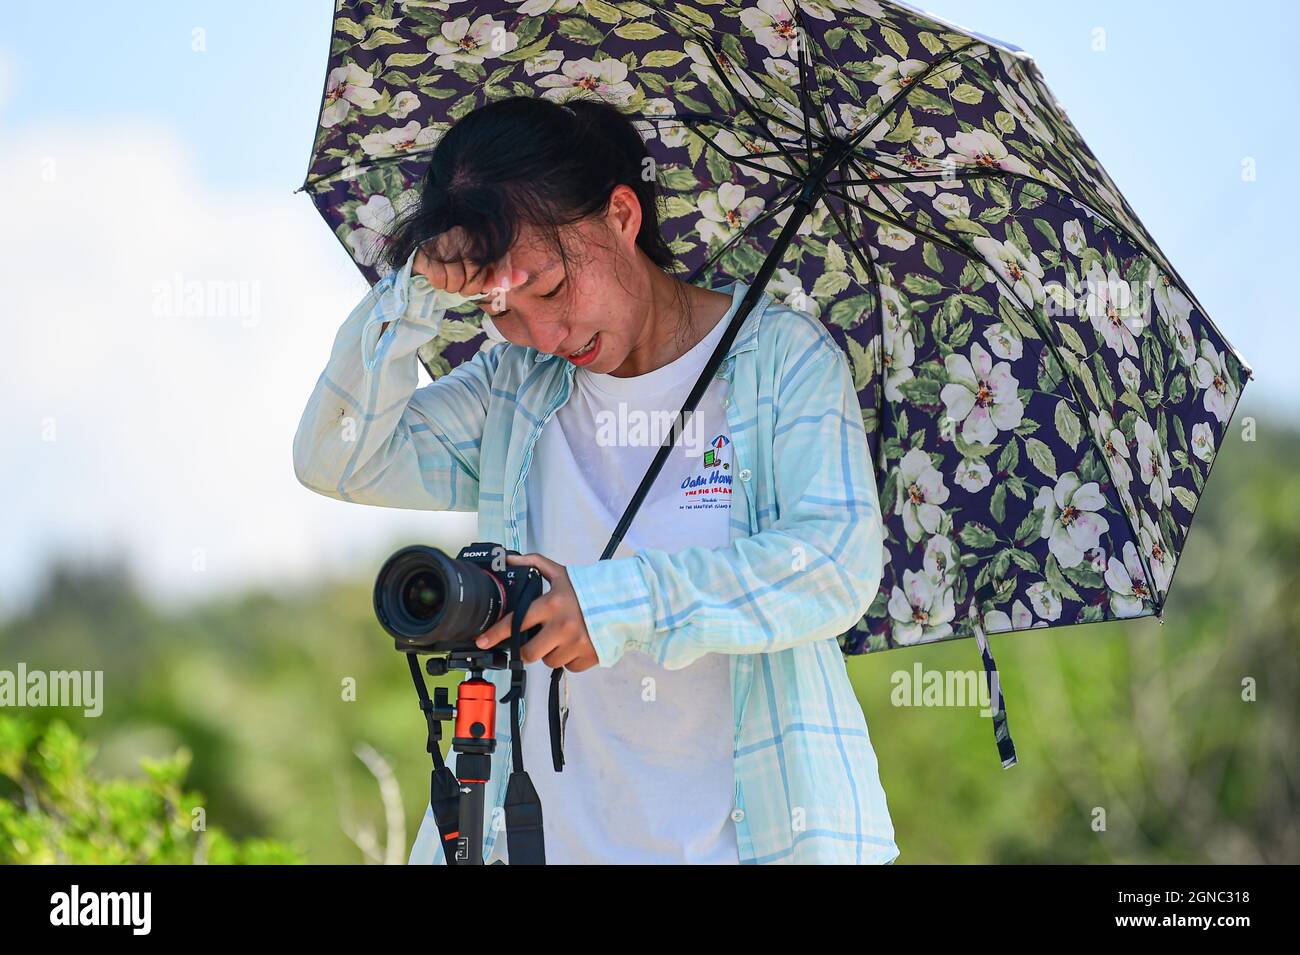 (210924) -- WENCHANG, Sept. 24, 2021 (Xinhua) -- Aerospace photography enthusiast Fu Yuexin waits to capture the moment of blast-off of the Long March-7 Y4 rocket, carrying Tianzhou-3, under scorching sun in Wenchang City, south China's Hainan Province, Sept. 20, 2021. The Long March-7 Y4 rocket, carrying Tianzhou-3, blasted off from the Wenchang Spacecraft Launch Site on Sept. 20, 2021, right in front of numerous cameras erected by photography enthusiasts with special interest in astronautics. Enchanted by the sophisticated launching technologies and the tremendous challenges of shooting the Stock Photo